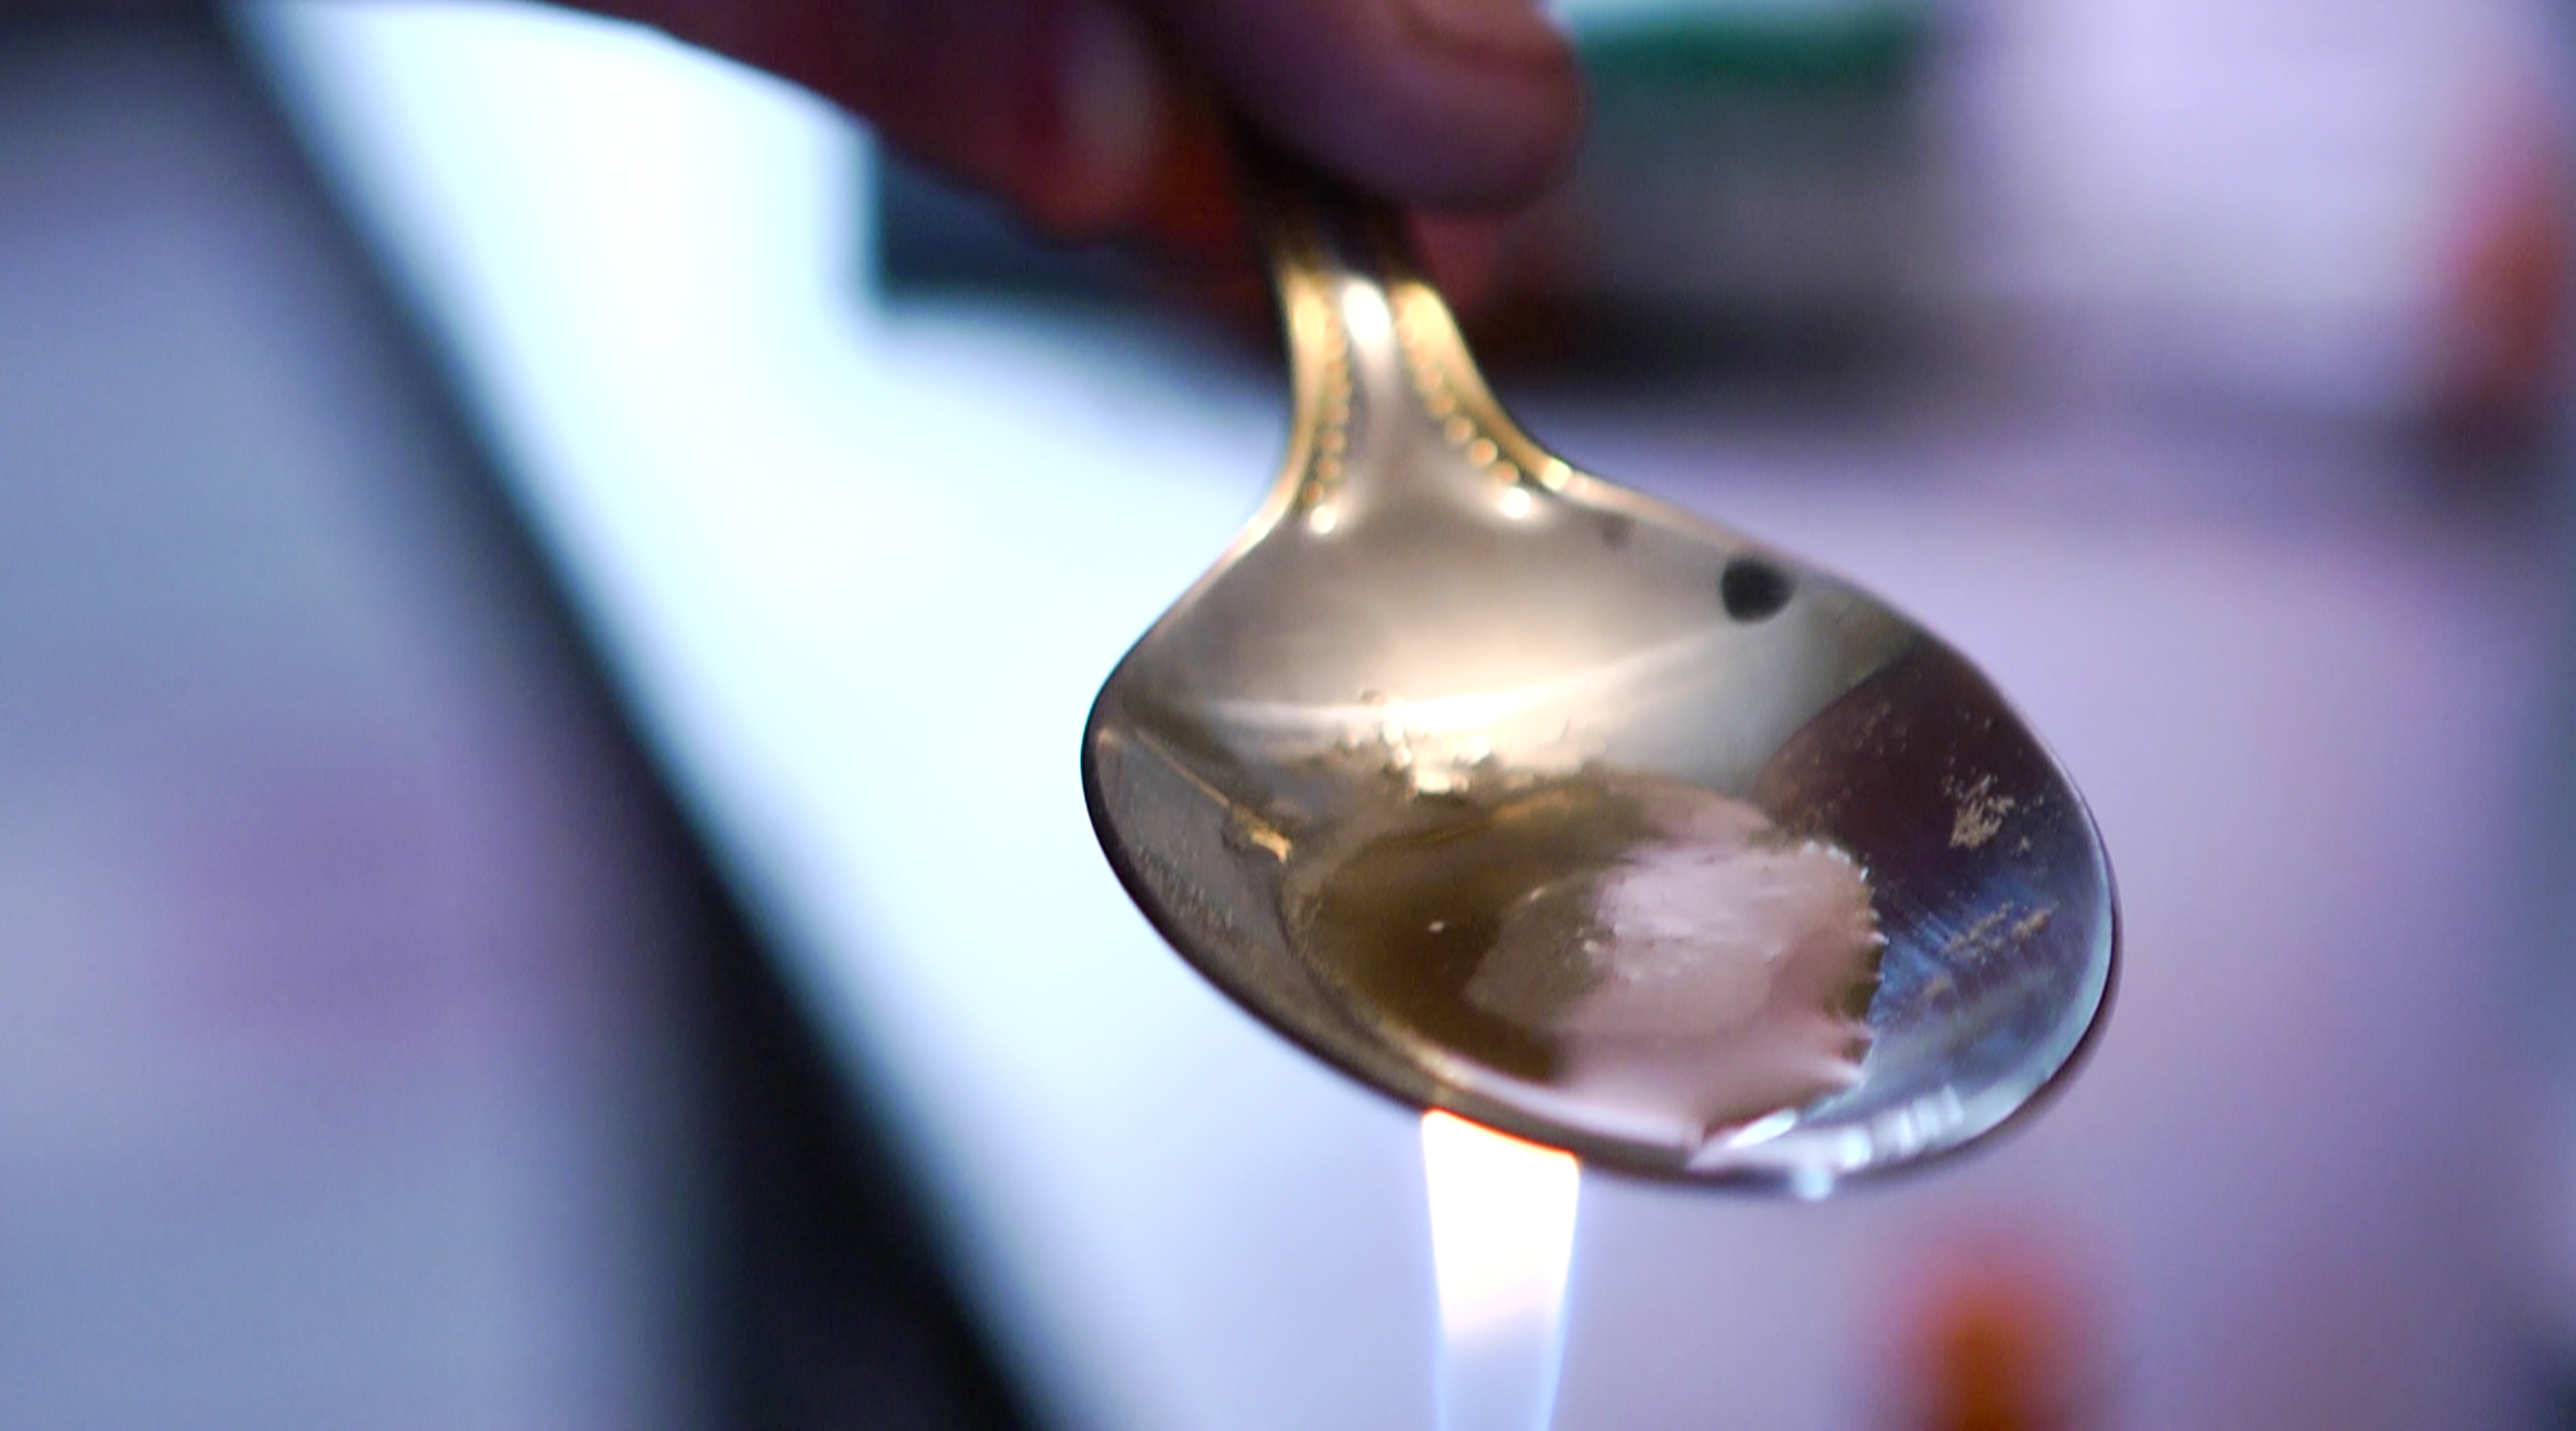 Screengrab from the film: Heroin is cooked and prepared for injection.